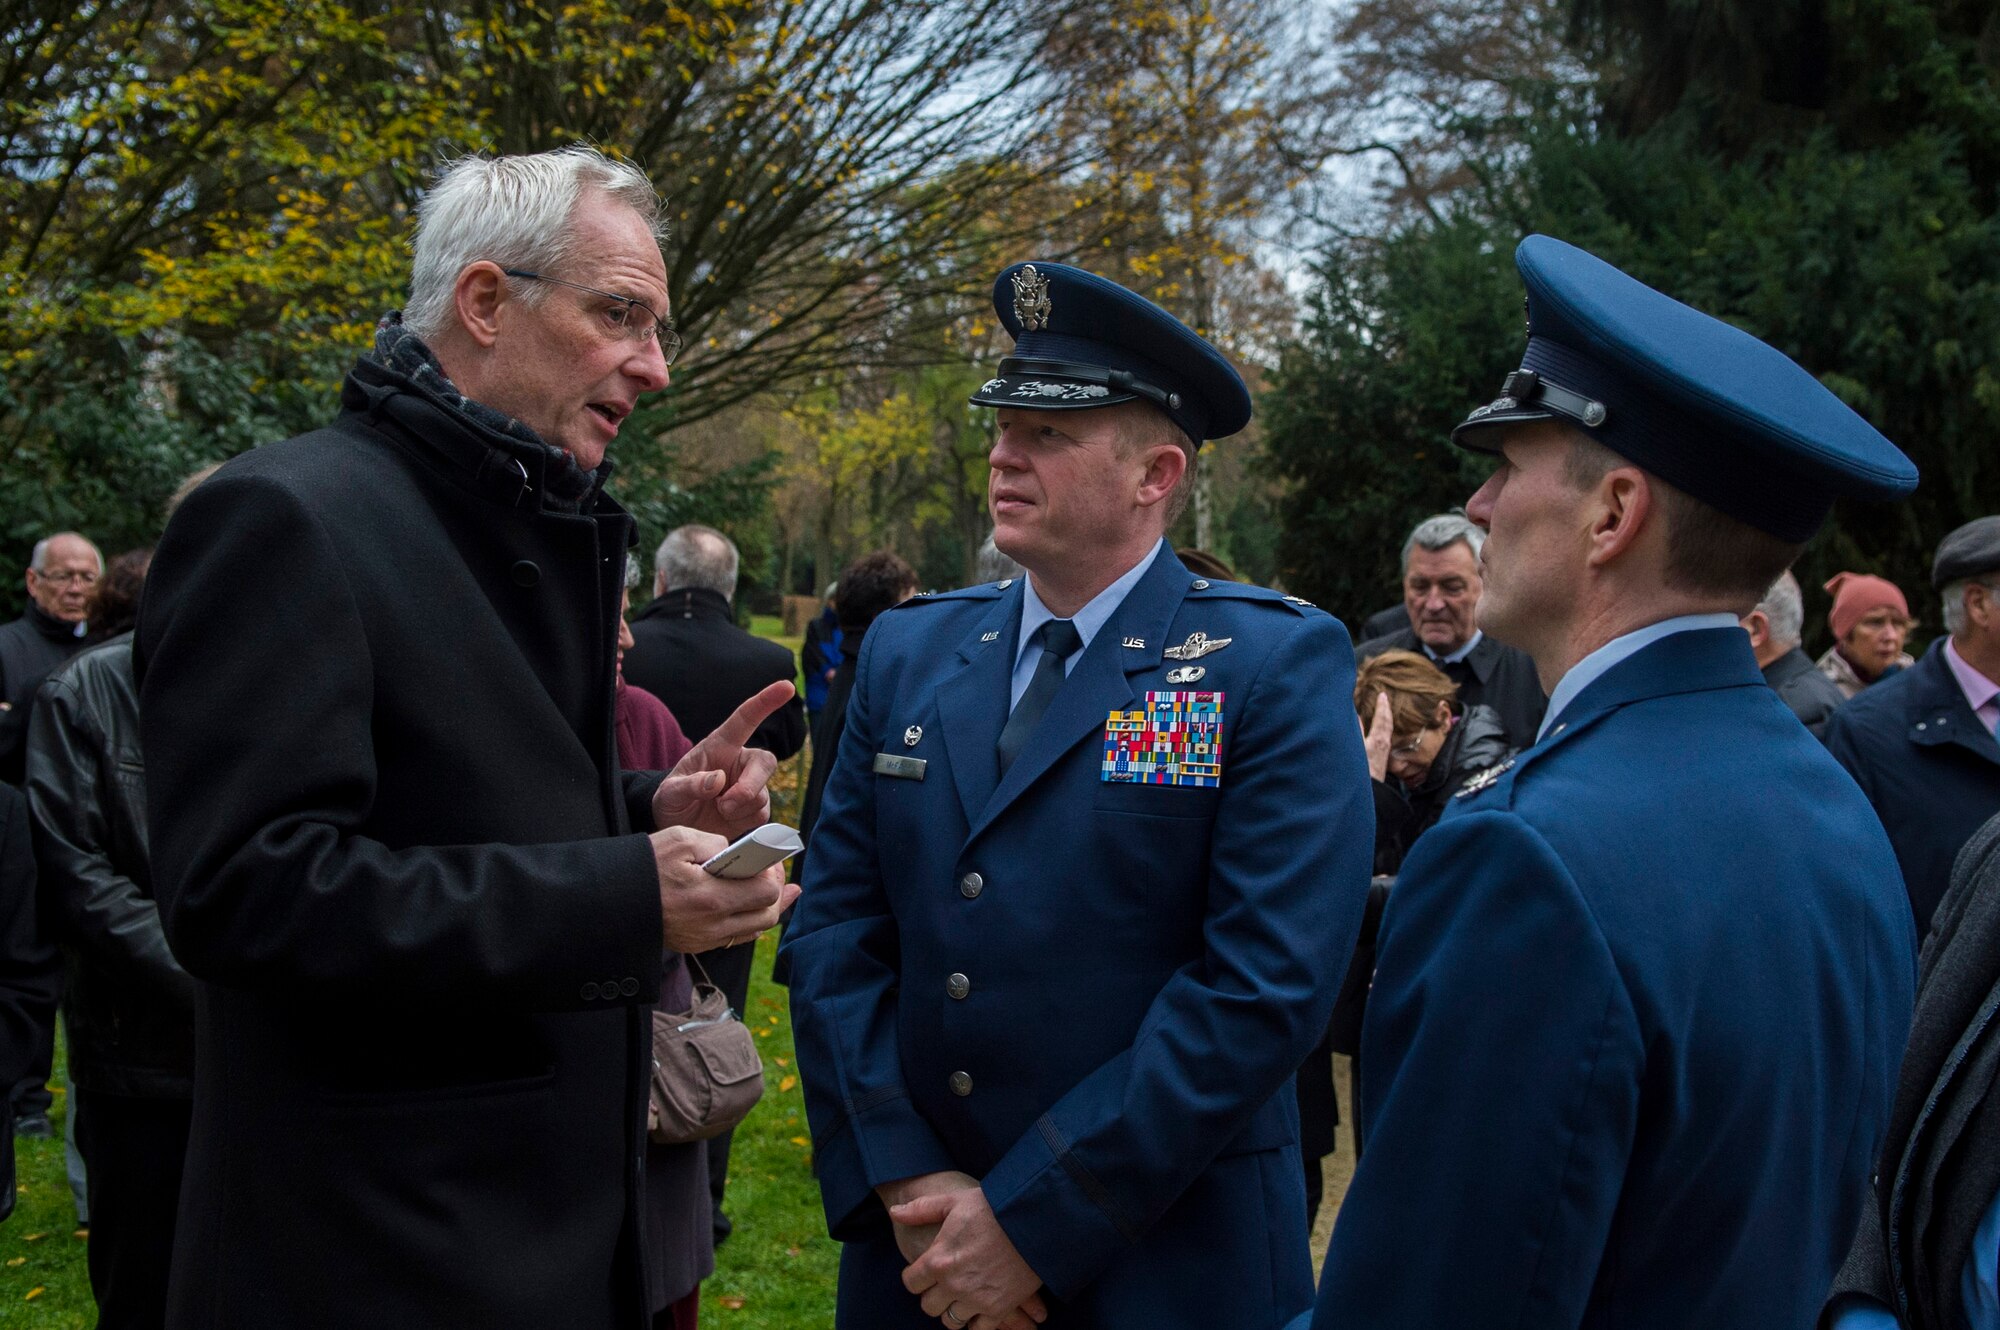 Wolfram Leibe, mayor of Trier, left, speaks with U.S. Air Force Col. Joe McFall, 52nd Fighter Wing commander, center, and U.S. Air Force Col. Steve Horton, 52nd FW vice commander during a National Mourning Day ceremony at a cemetery in Trier, Germany, Nov. 15, 2015. Leibe gave a speech during the ceremony addressing the importance of the day. (U.S. Air Force photo by Airman 1st Class Luke Kitterman/Released)